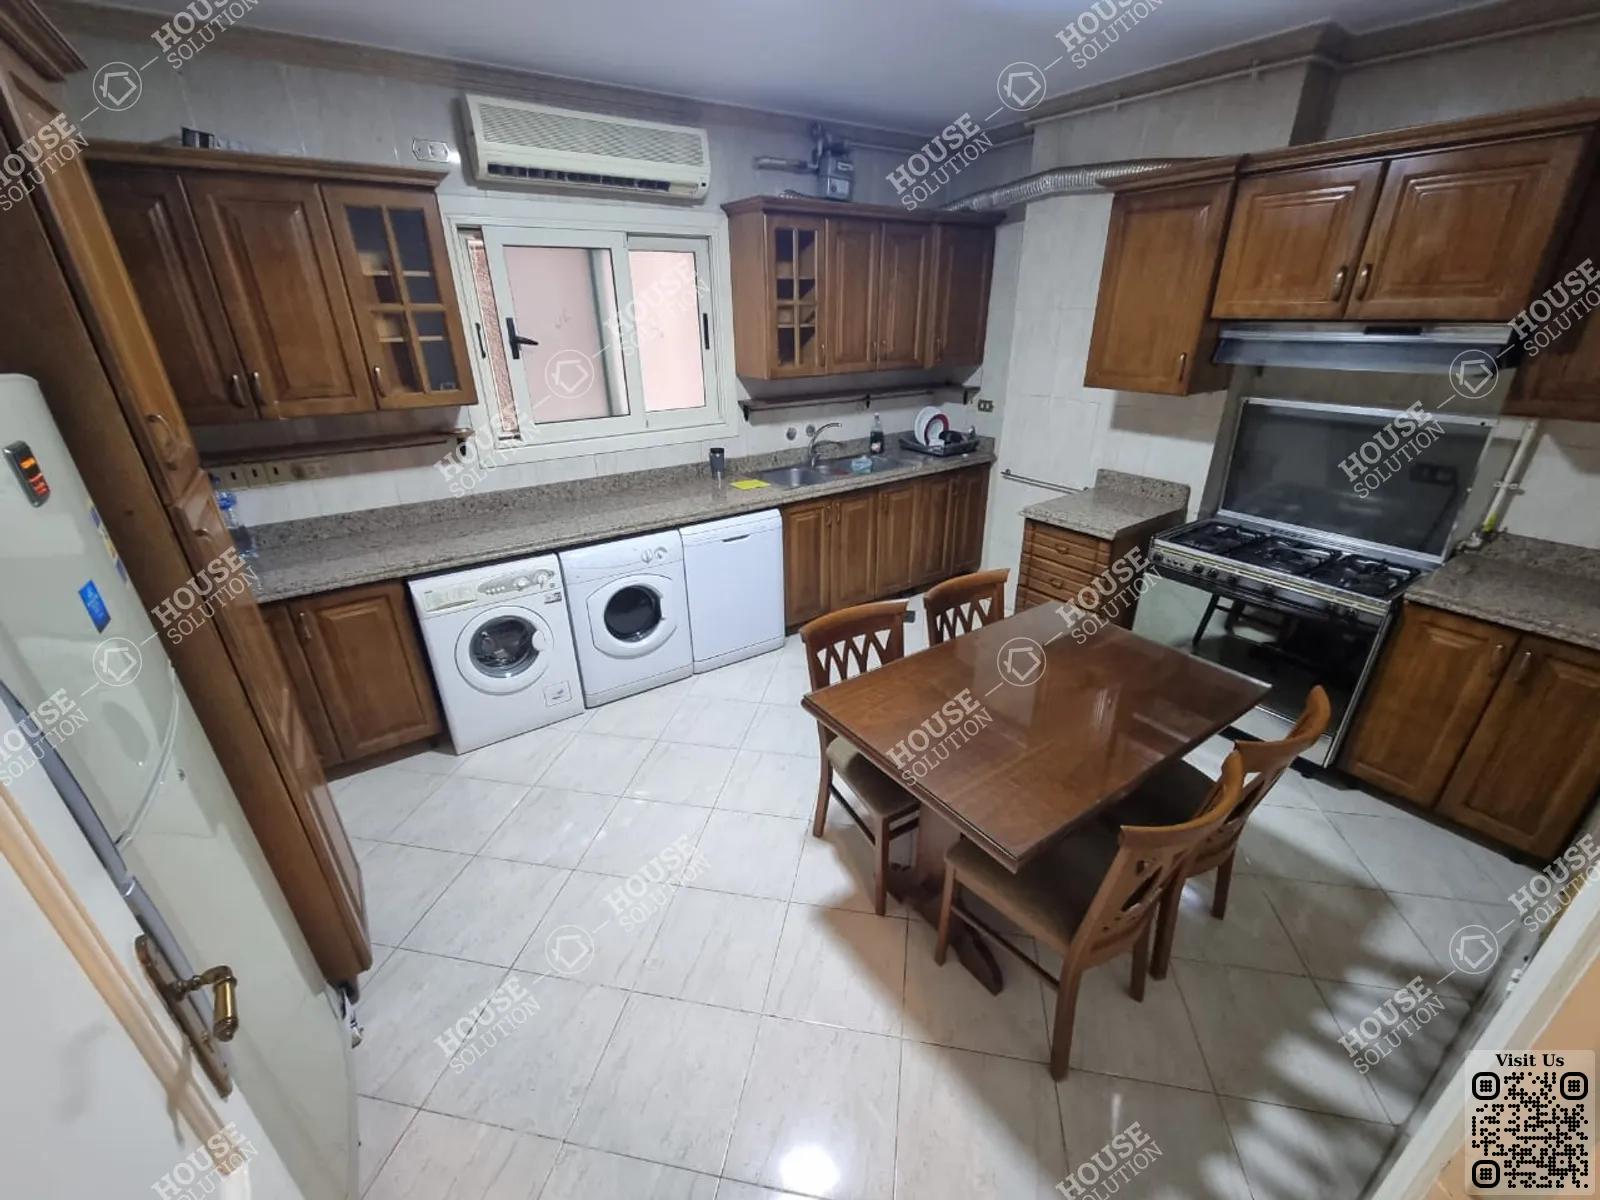 KITCHEN  @ Apartments For Rent In Maadi Maadi Degla Area: 180 m² consists of 3 Bedrooms 2 Bathrooms Furnished 5 stars #4833-1